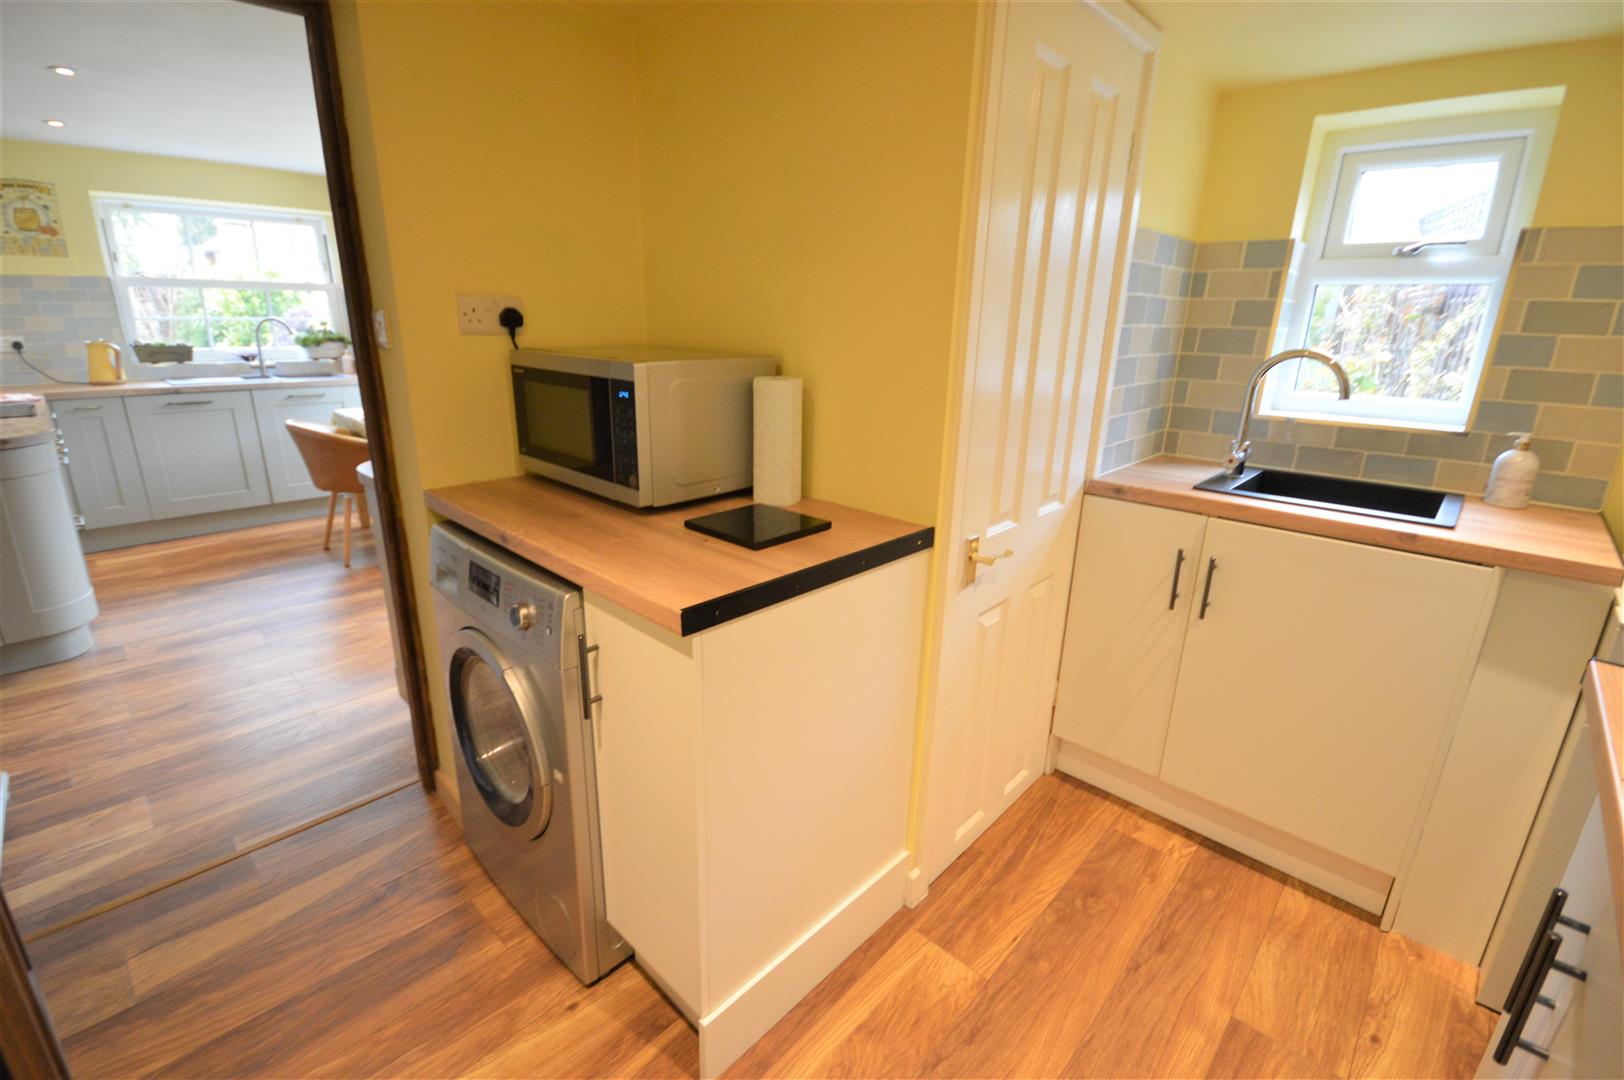 3 bed detached for sale in Luston 6